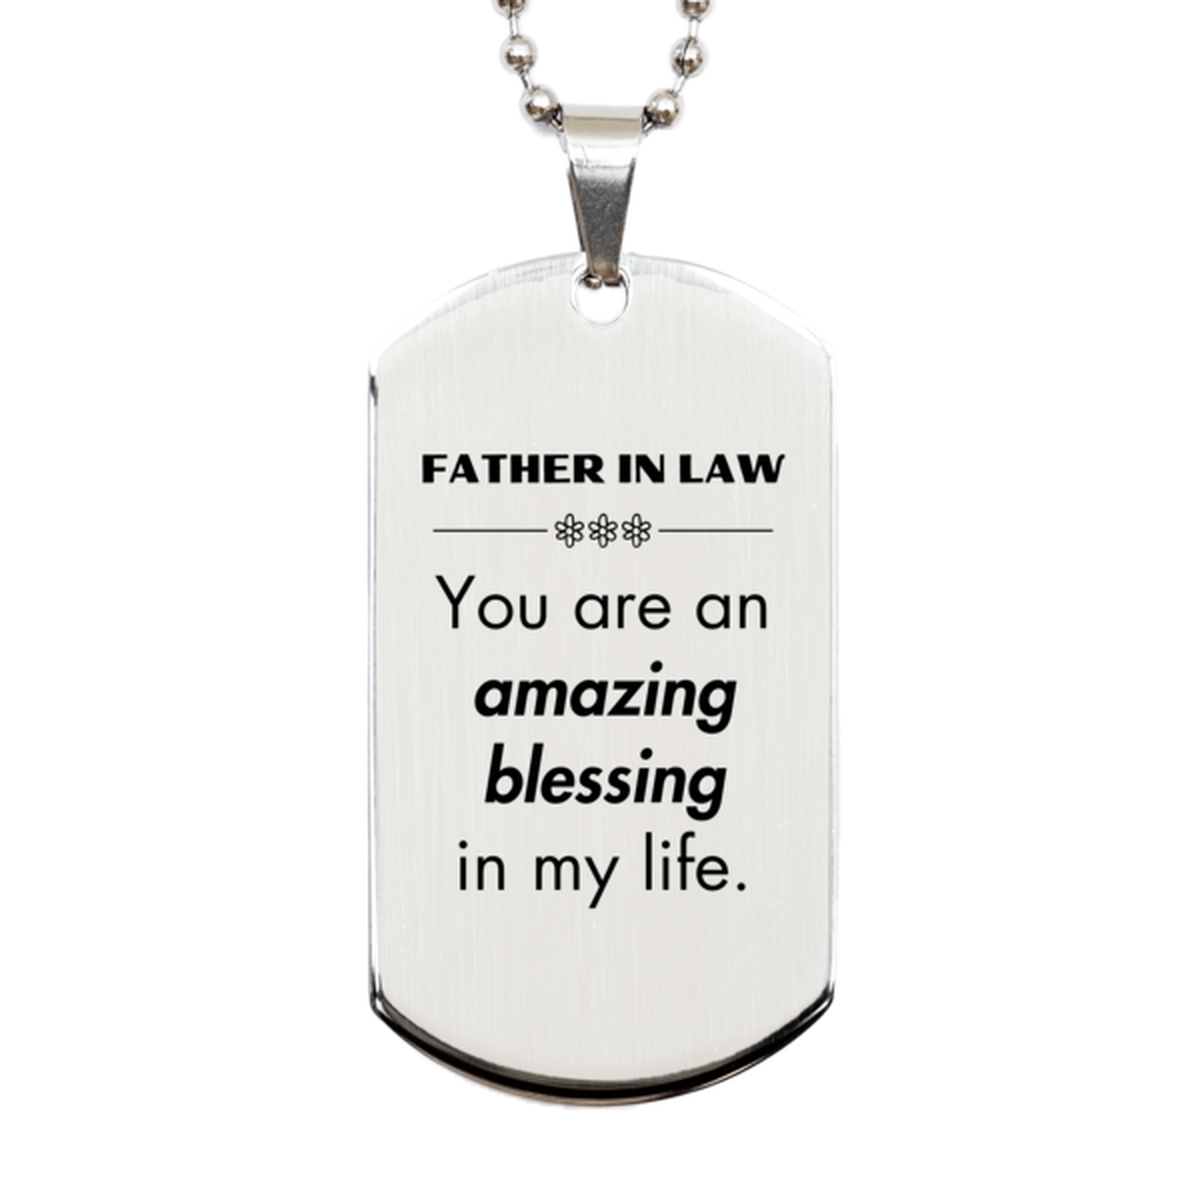 Father In Law Silver Dog Tag, You are an amazing blessing in my life, Thank You Gifts For Father In Law, Inspirational Birthday Christmas Unique Gifts For Father In Law